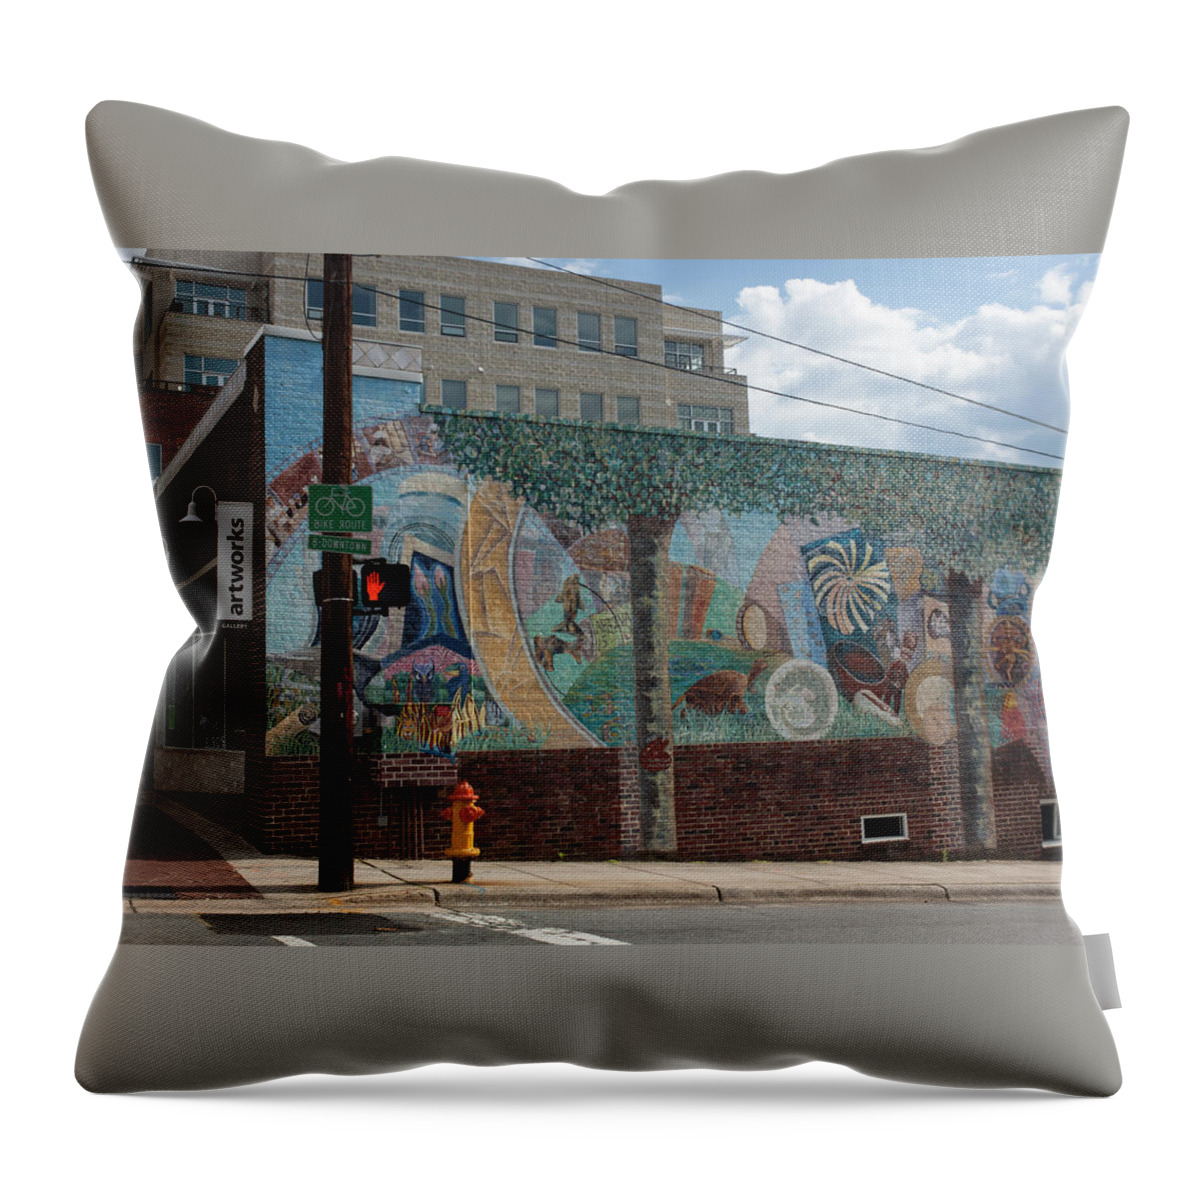 Photograph Throw Pillow featuring the photograph Downtown Winston Salem Series V by Suzanne Gaff